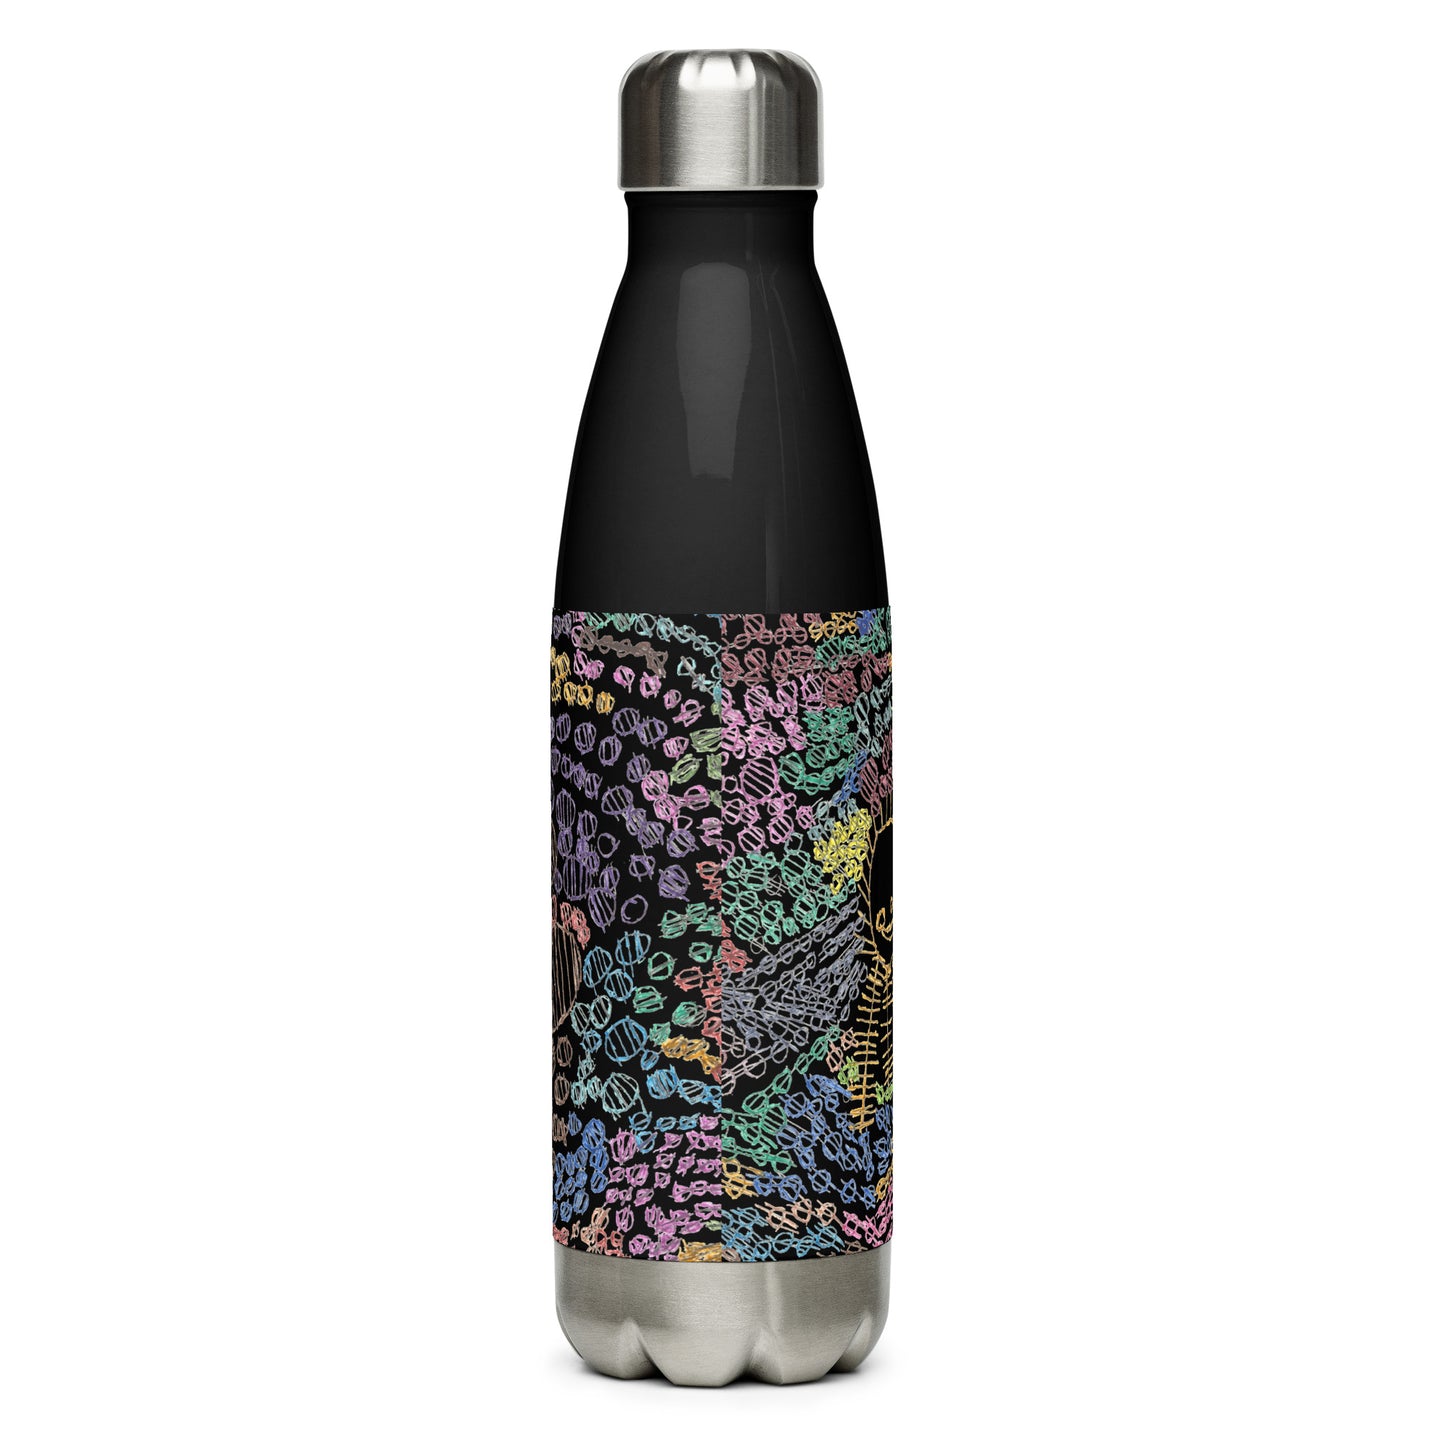 Stainless steel water bottle - "Eating Sushi"